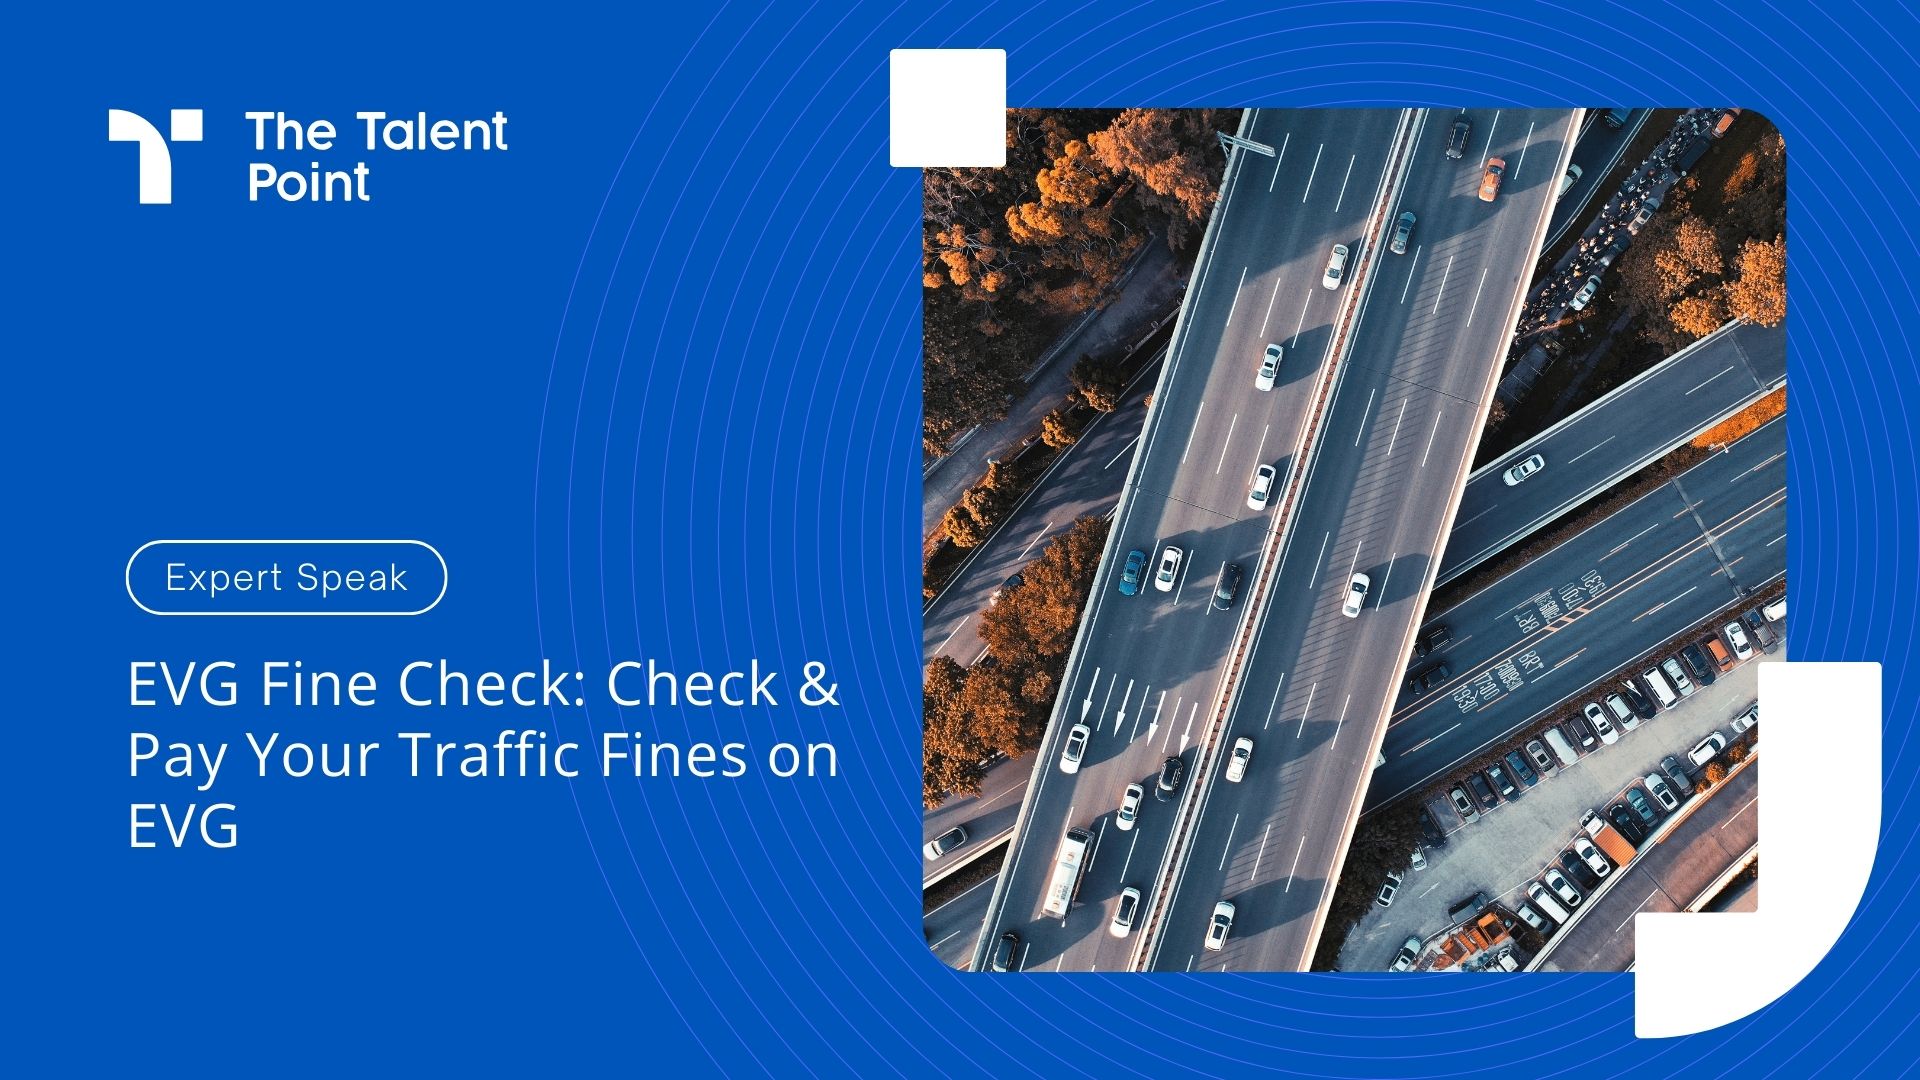 EVG Fine Check: Check & Pay Your Traffic Fines on EVG